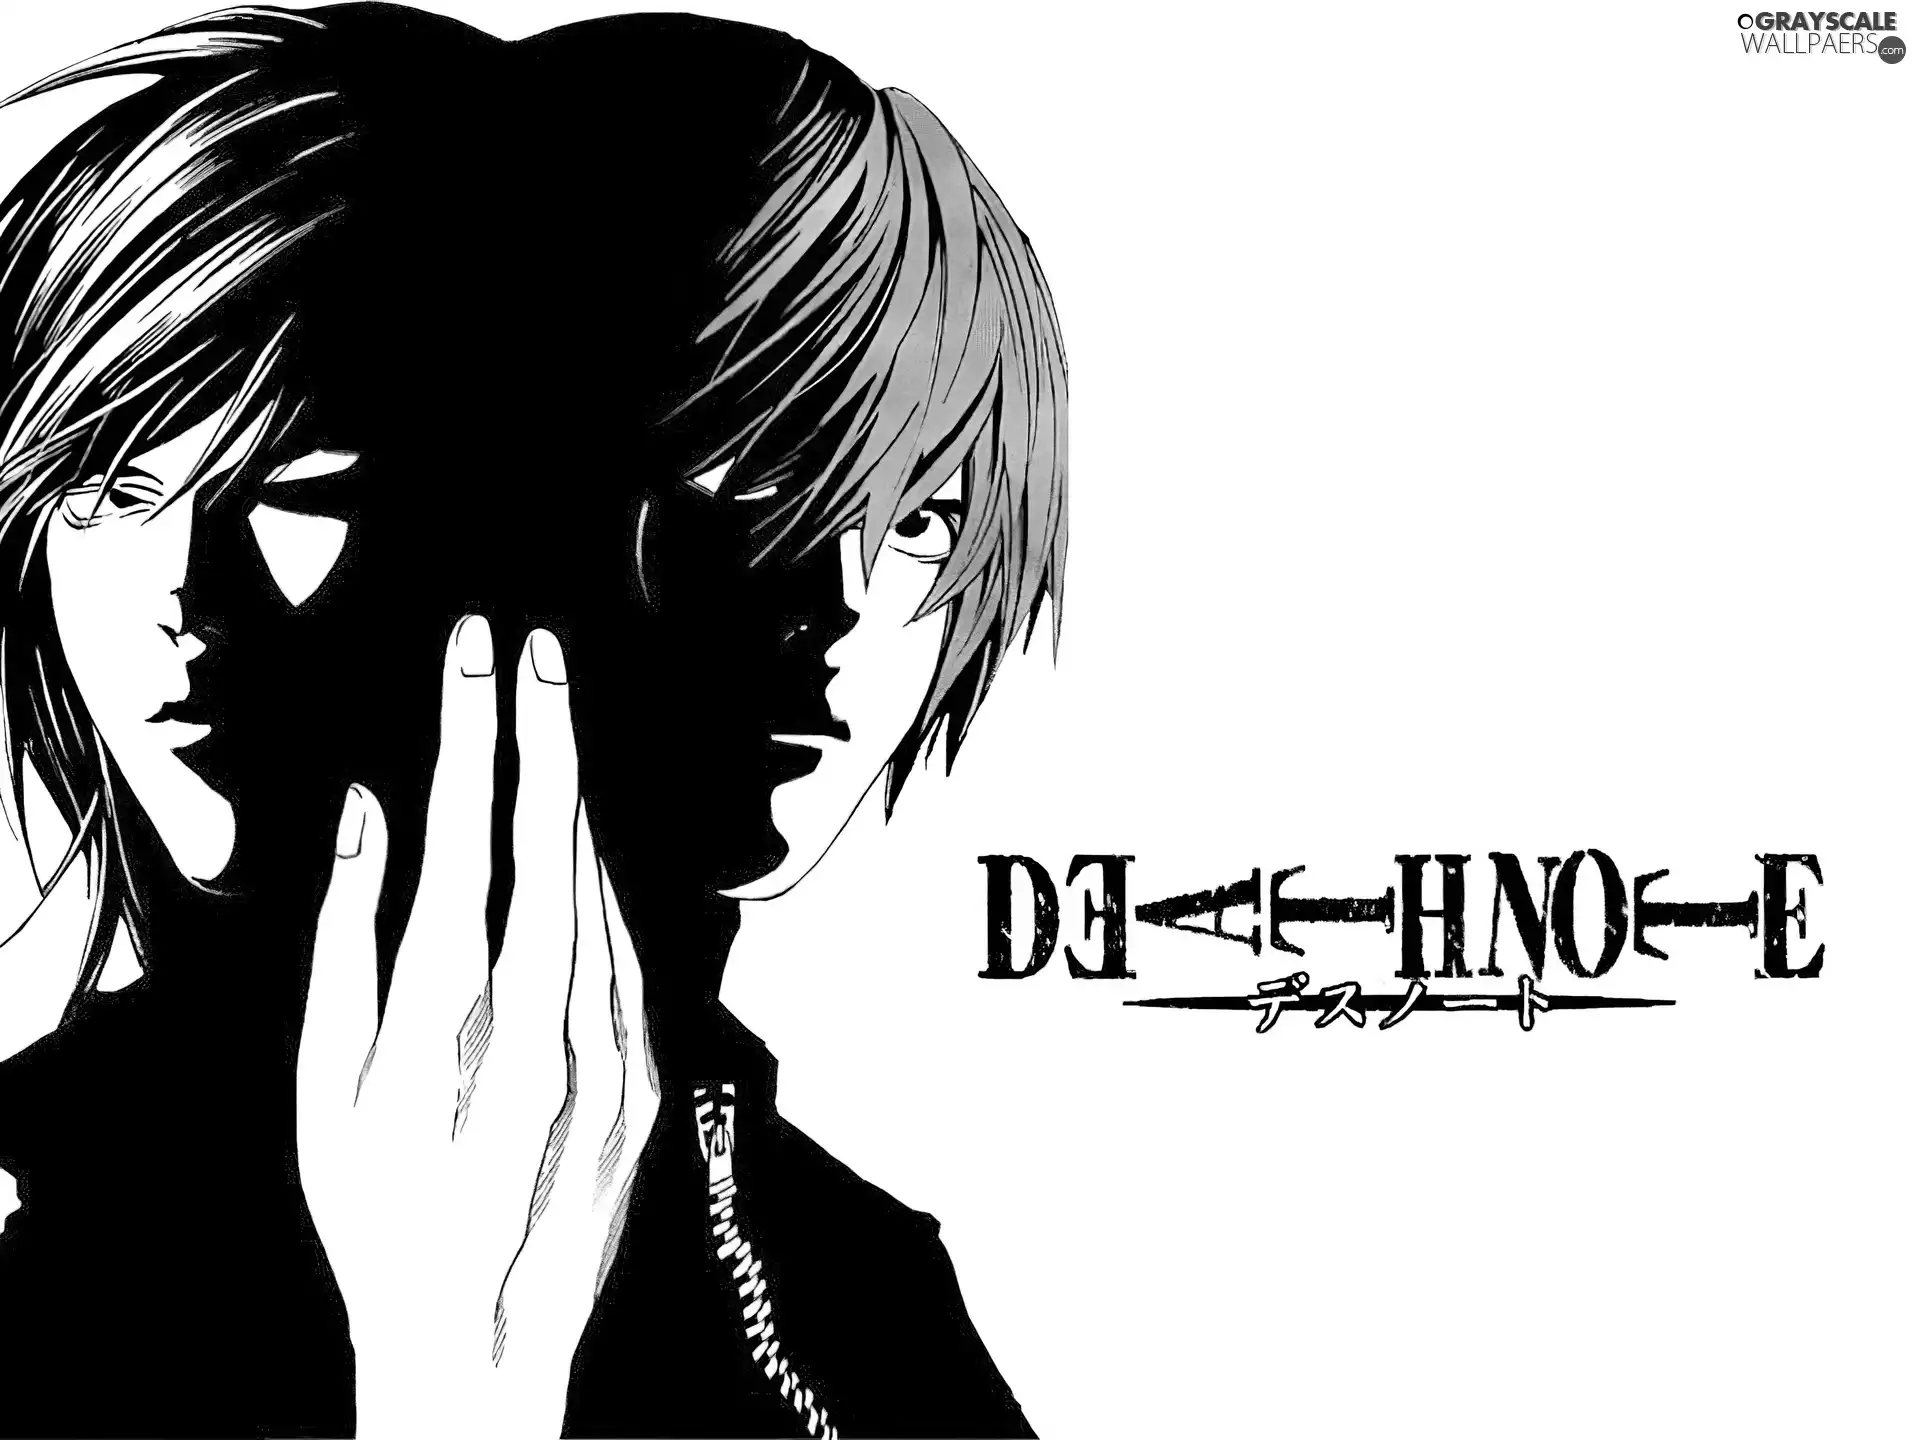 reflection, form, hand, text, Death Note